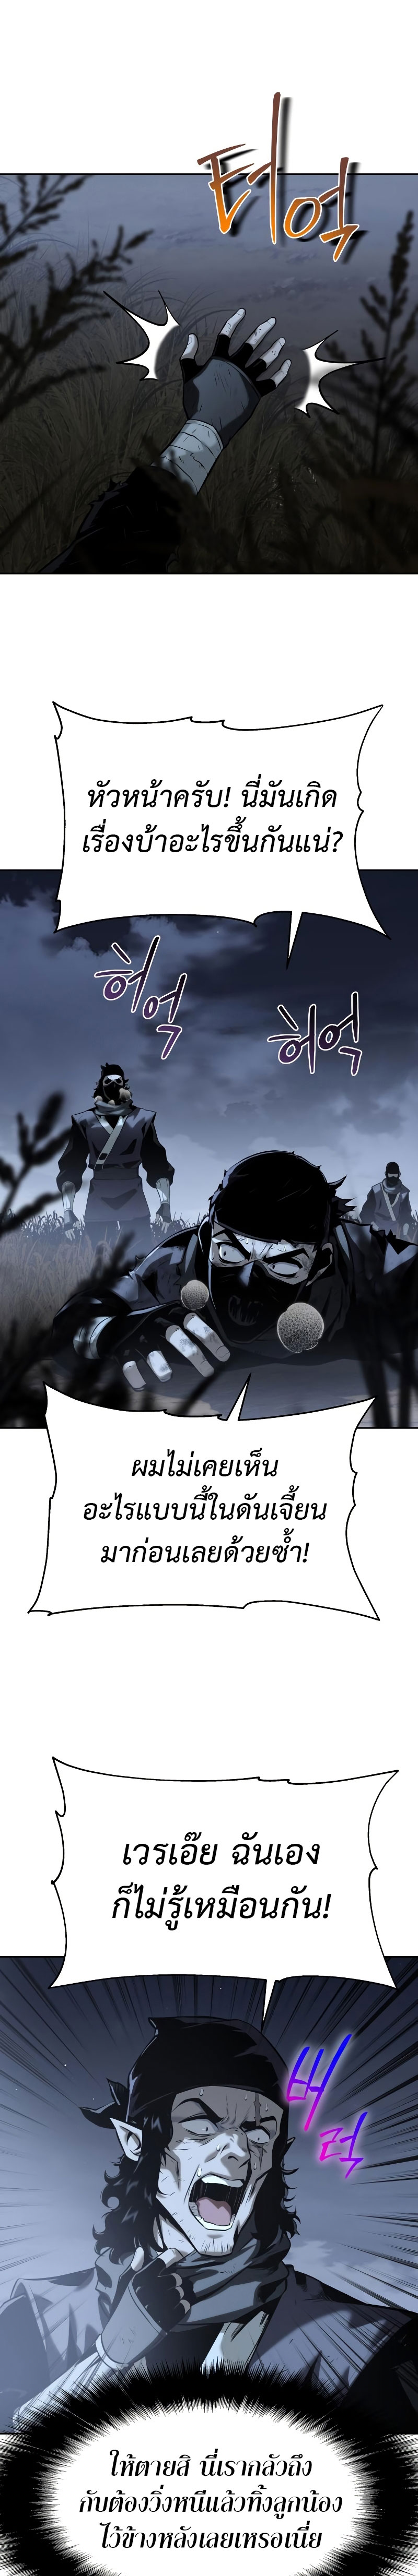 The Knight King 18 (26)